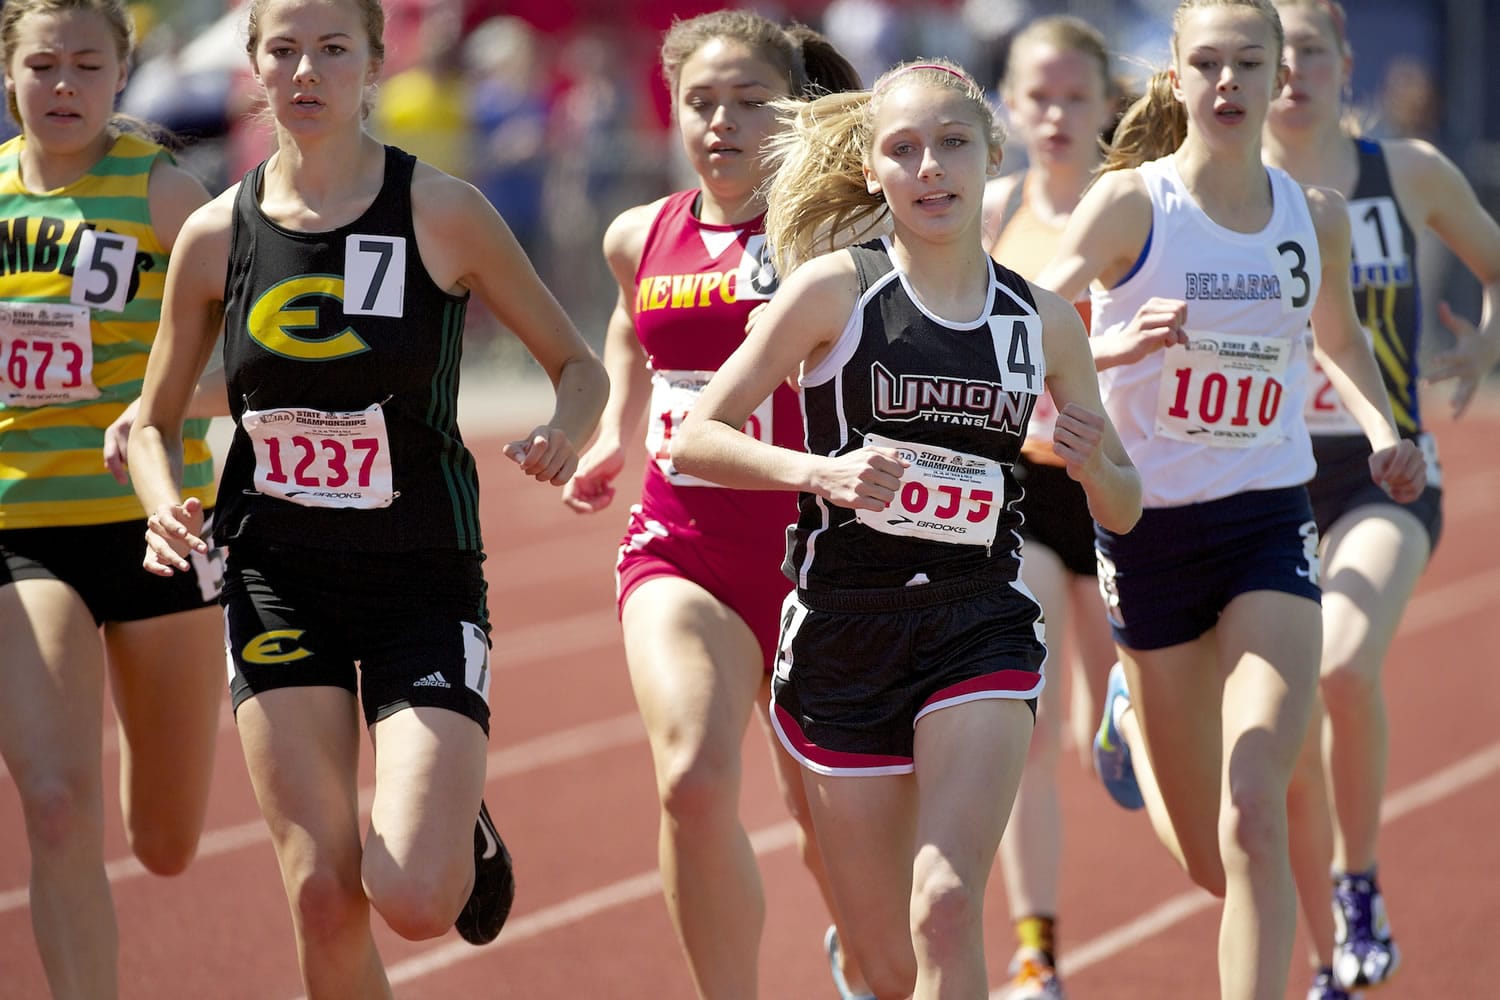 Union's Alexis Fuller, center, leads the way in the girls 800-meter race. Fuller won the event in 2:13.69.